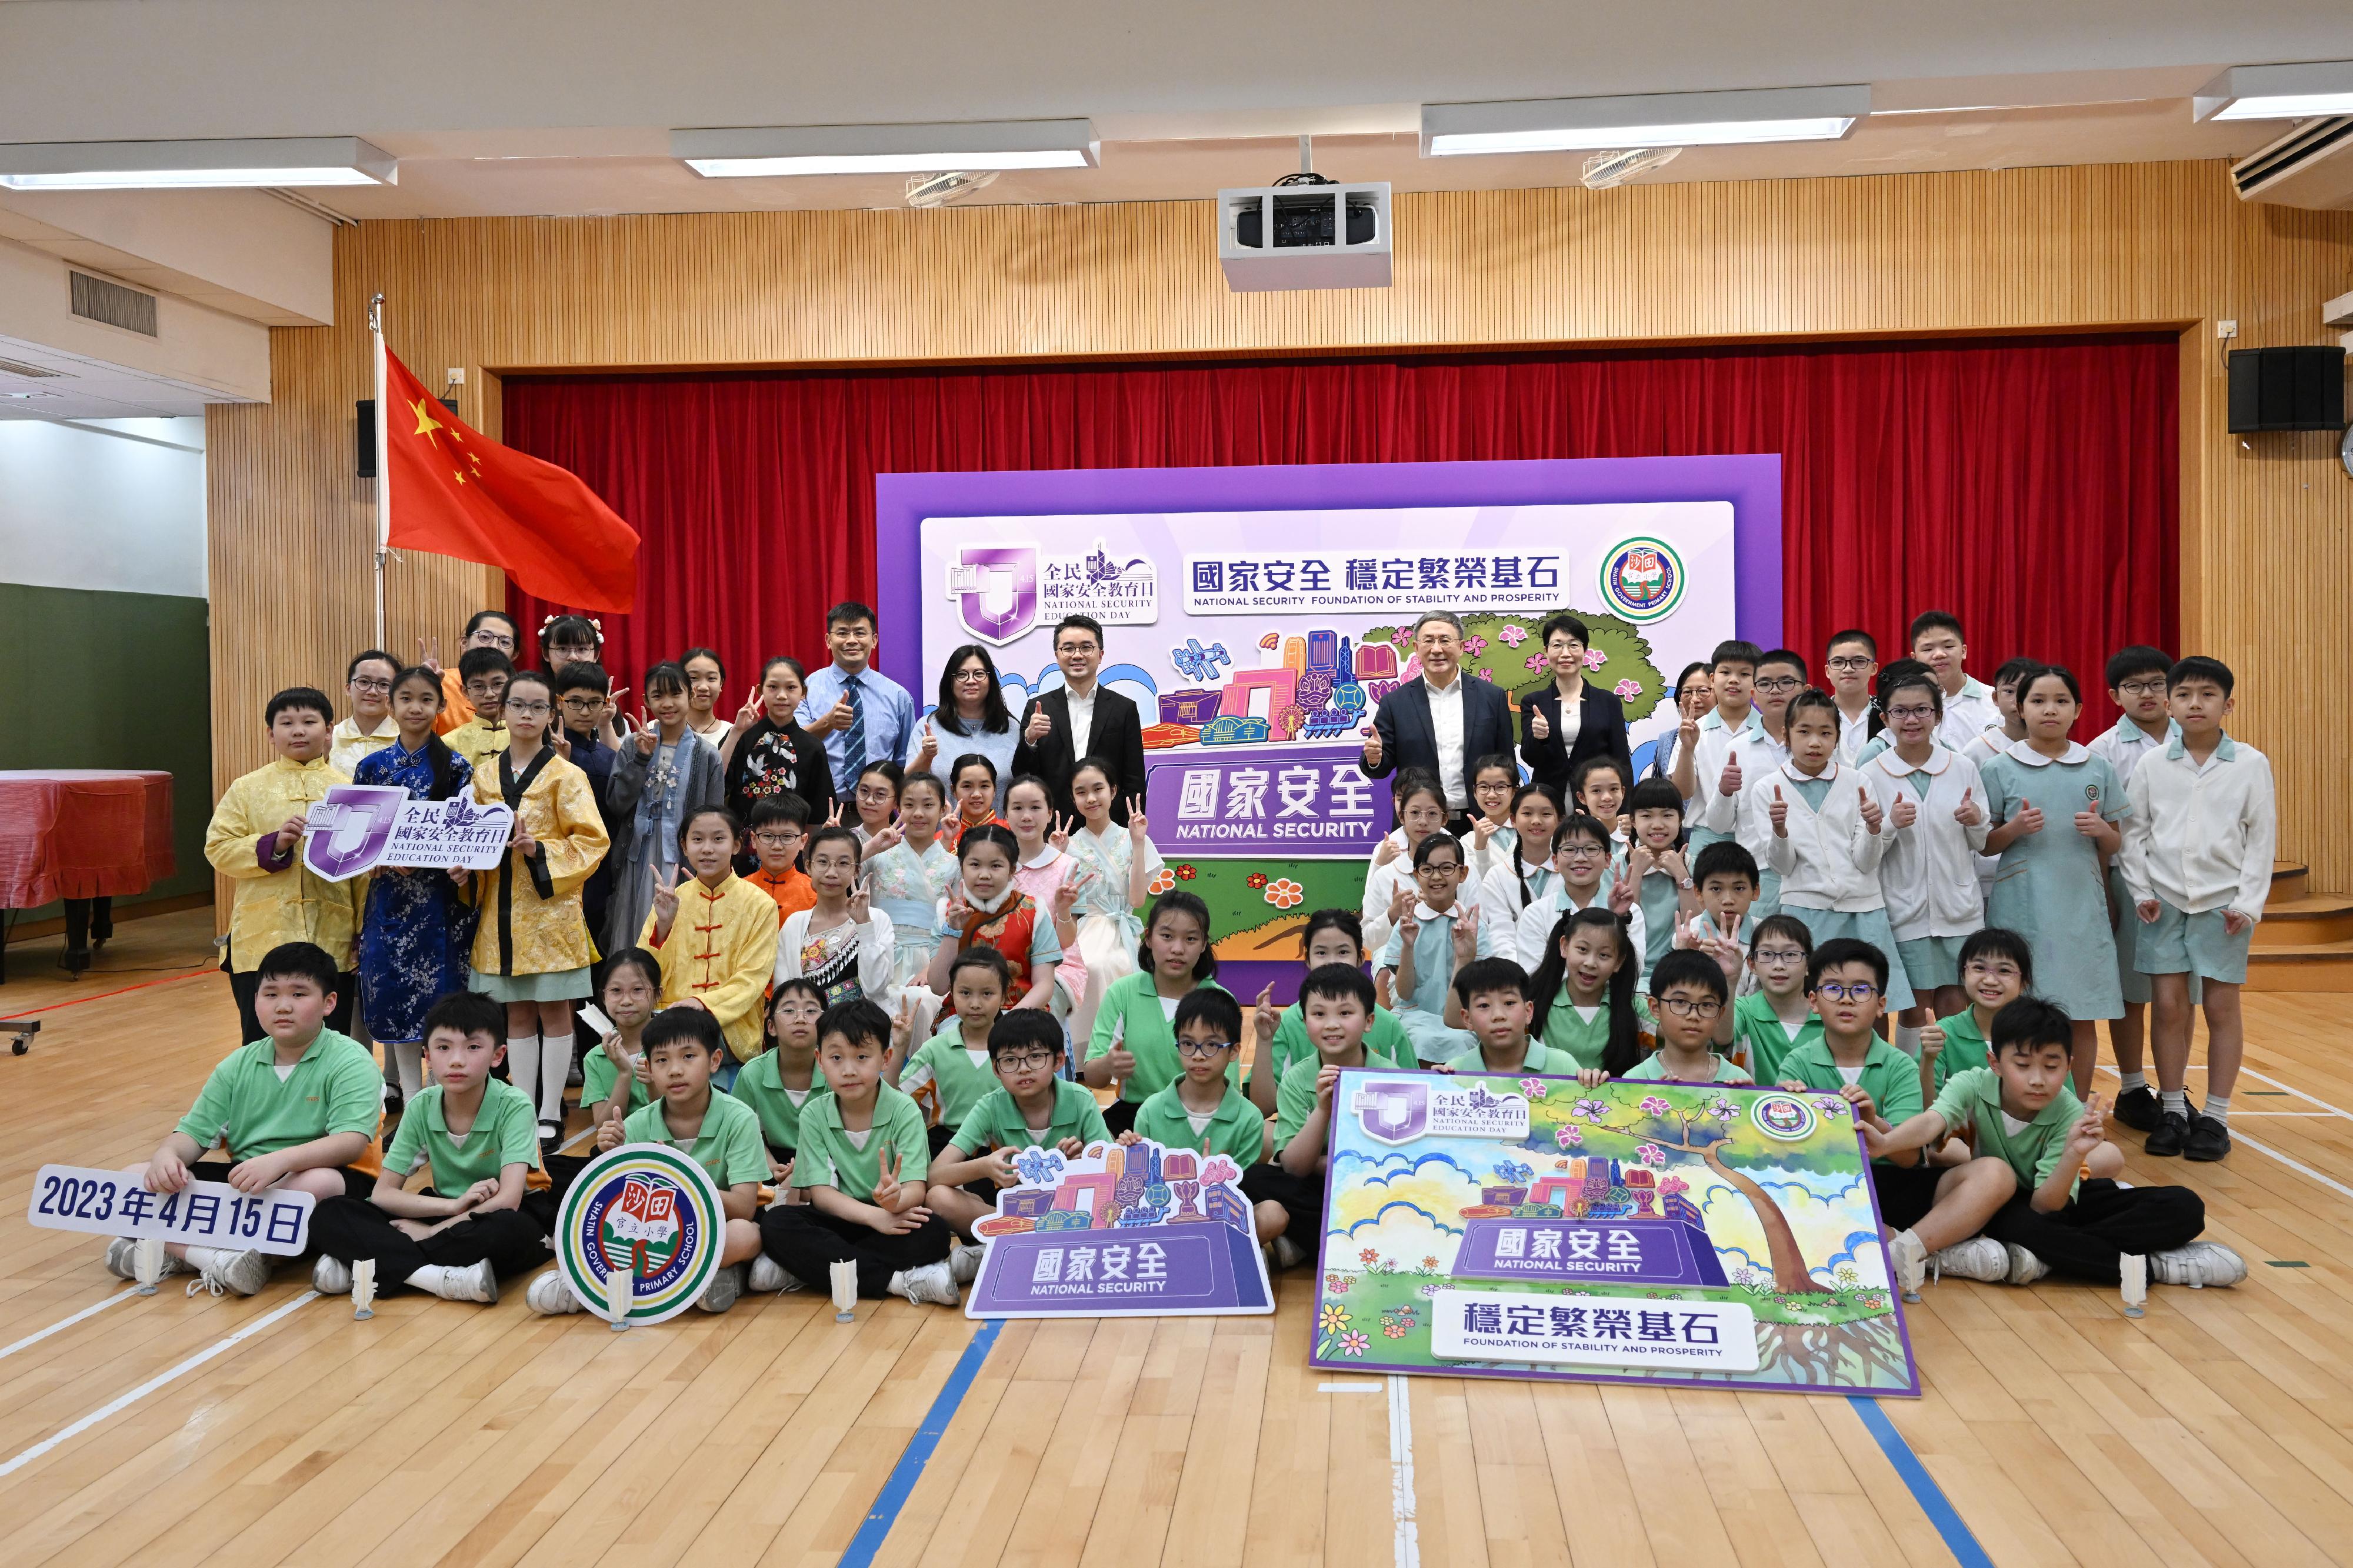 The Deputy Chief Secretary for Administration, Mr Cheuk Wing-hing, and the Acting Secretary for Education, Mr Sze Chun-fai, join a group photo with the students and the school principal Ms Ellen Wong in front of a mural themed "National Security: Foundation of Stability and Prosperity" at Shatin Government Primary School today (April 13).